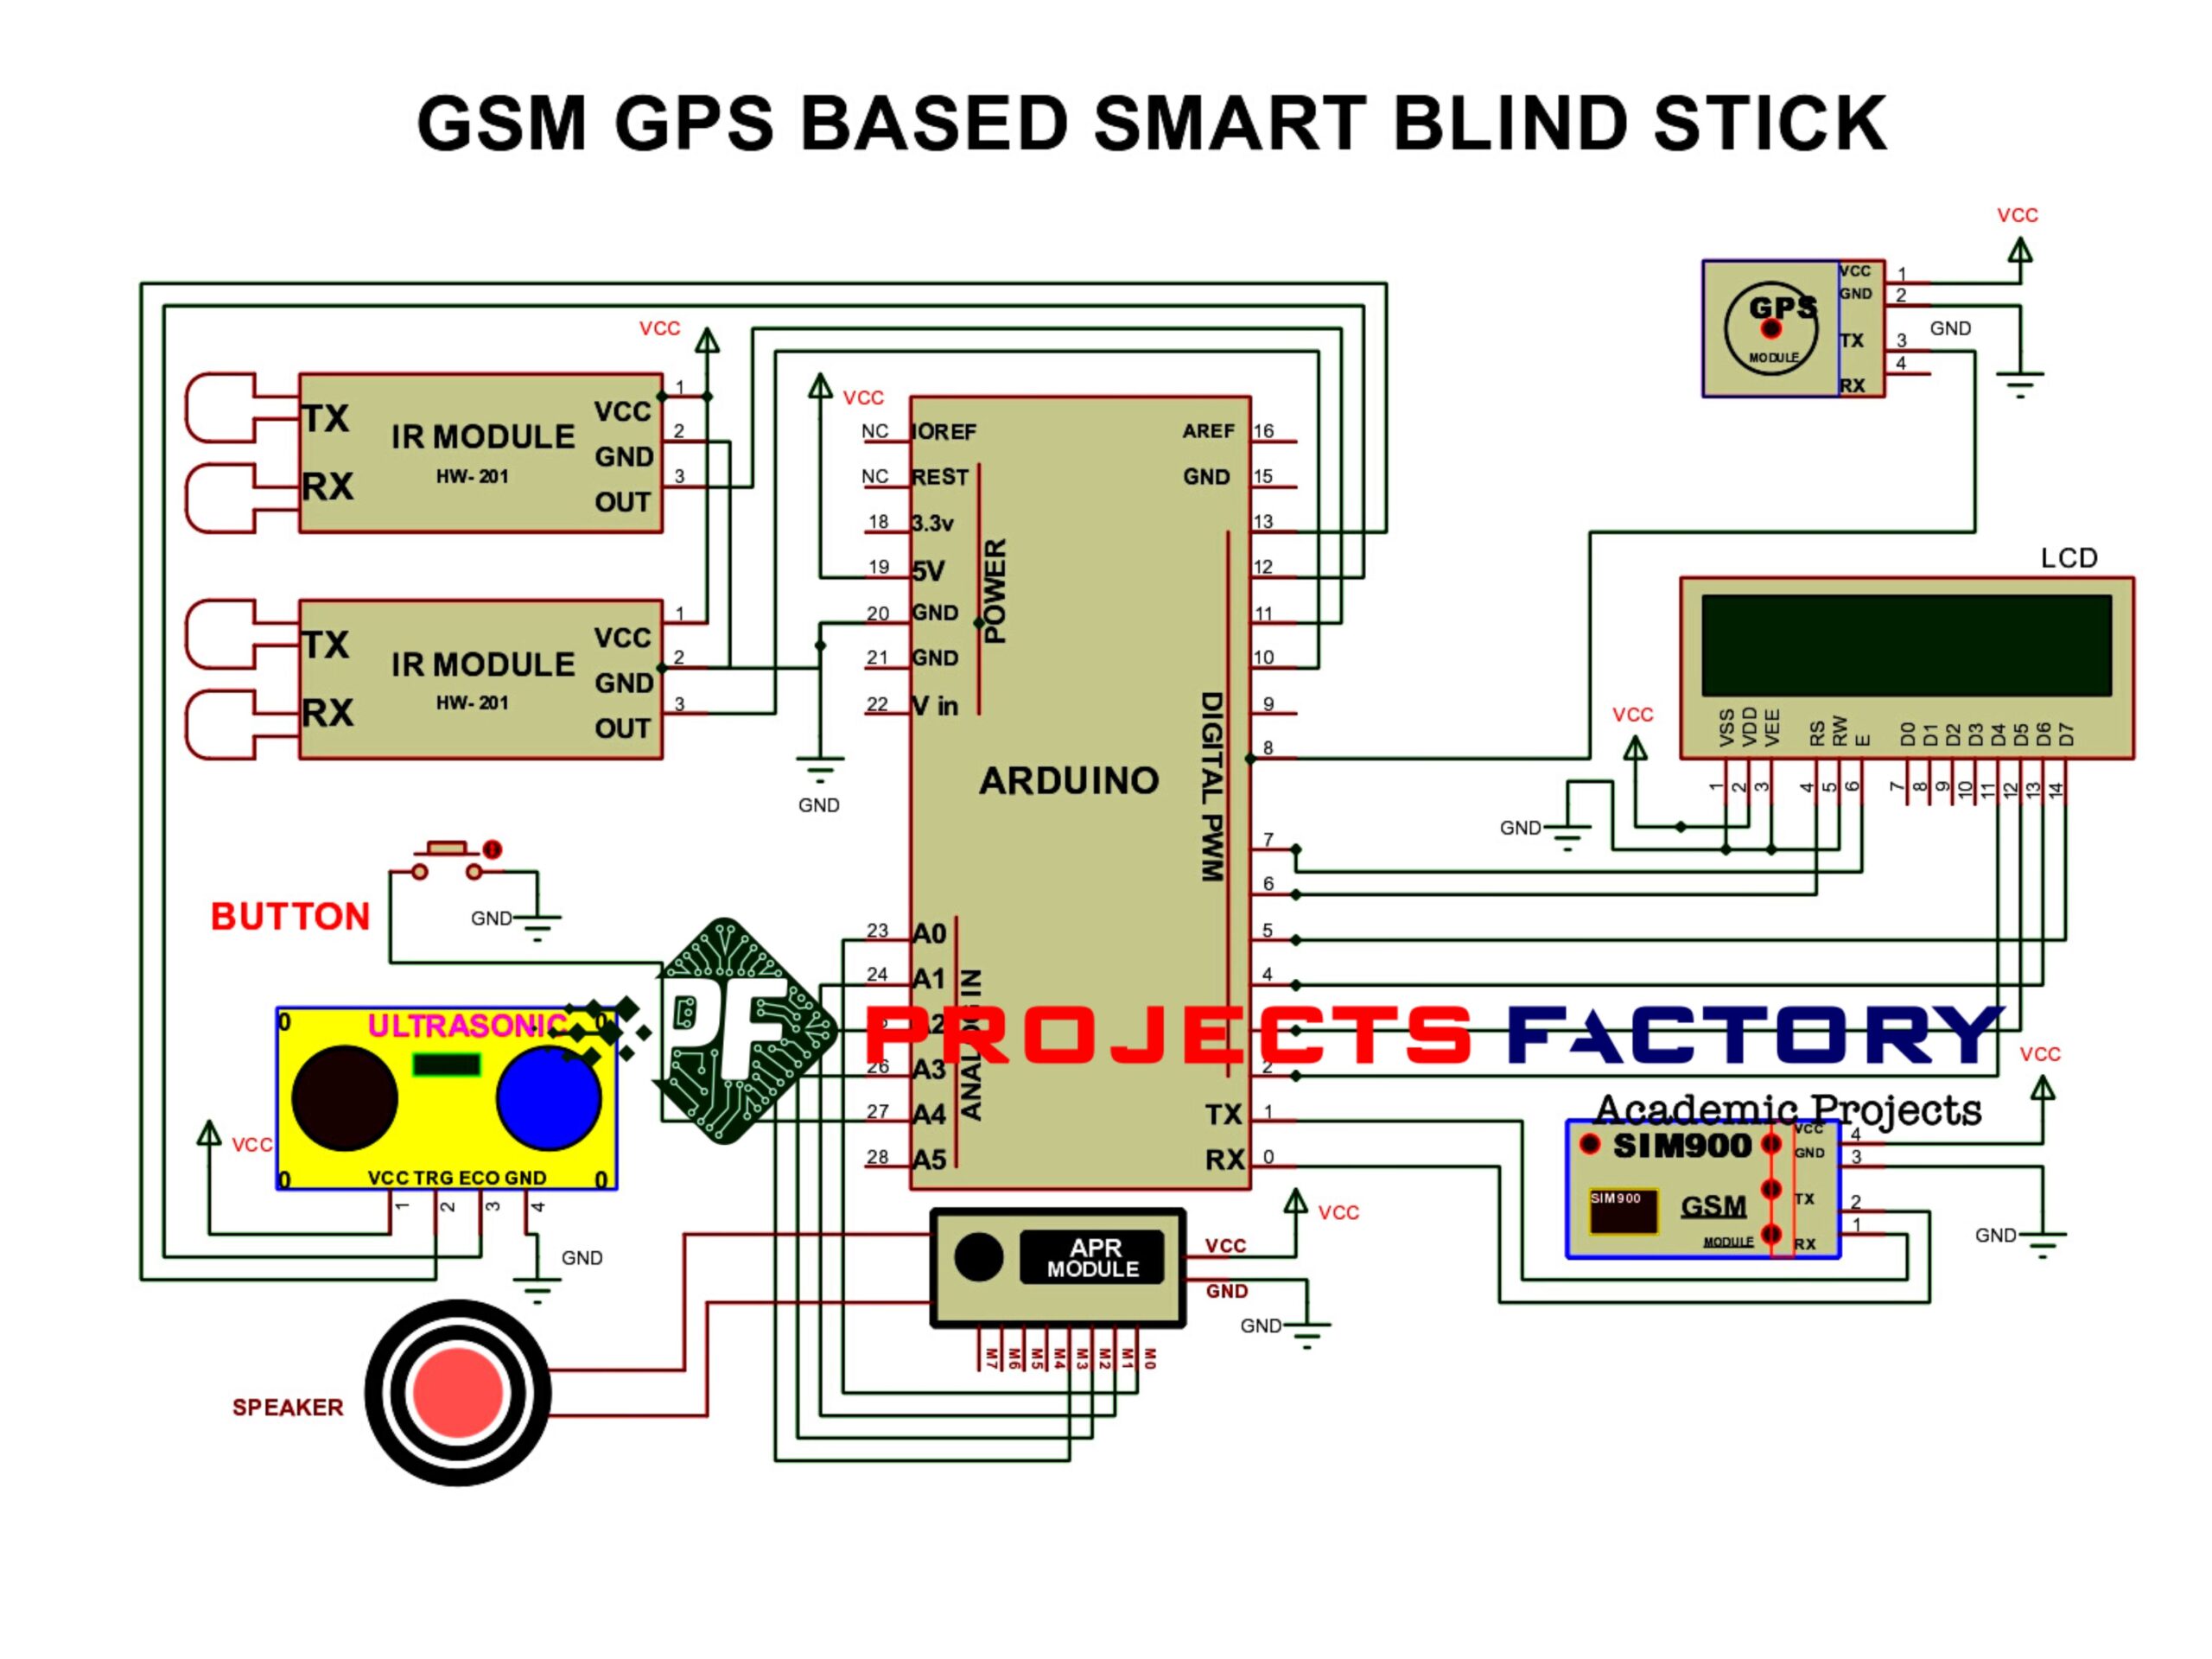 https://projectsfactory.in/wp-content/uploads/2022/08/gsm-gps-smart-blind-stick-4608-by-3456-4-scaled.jpg